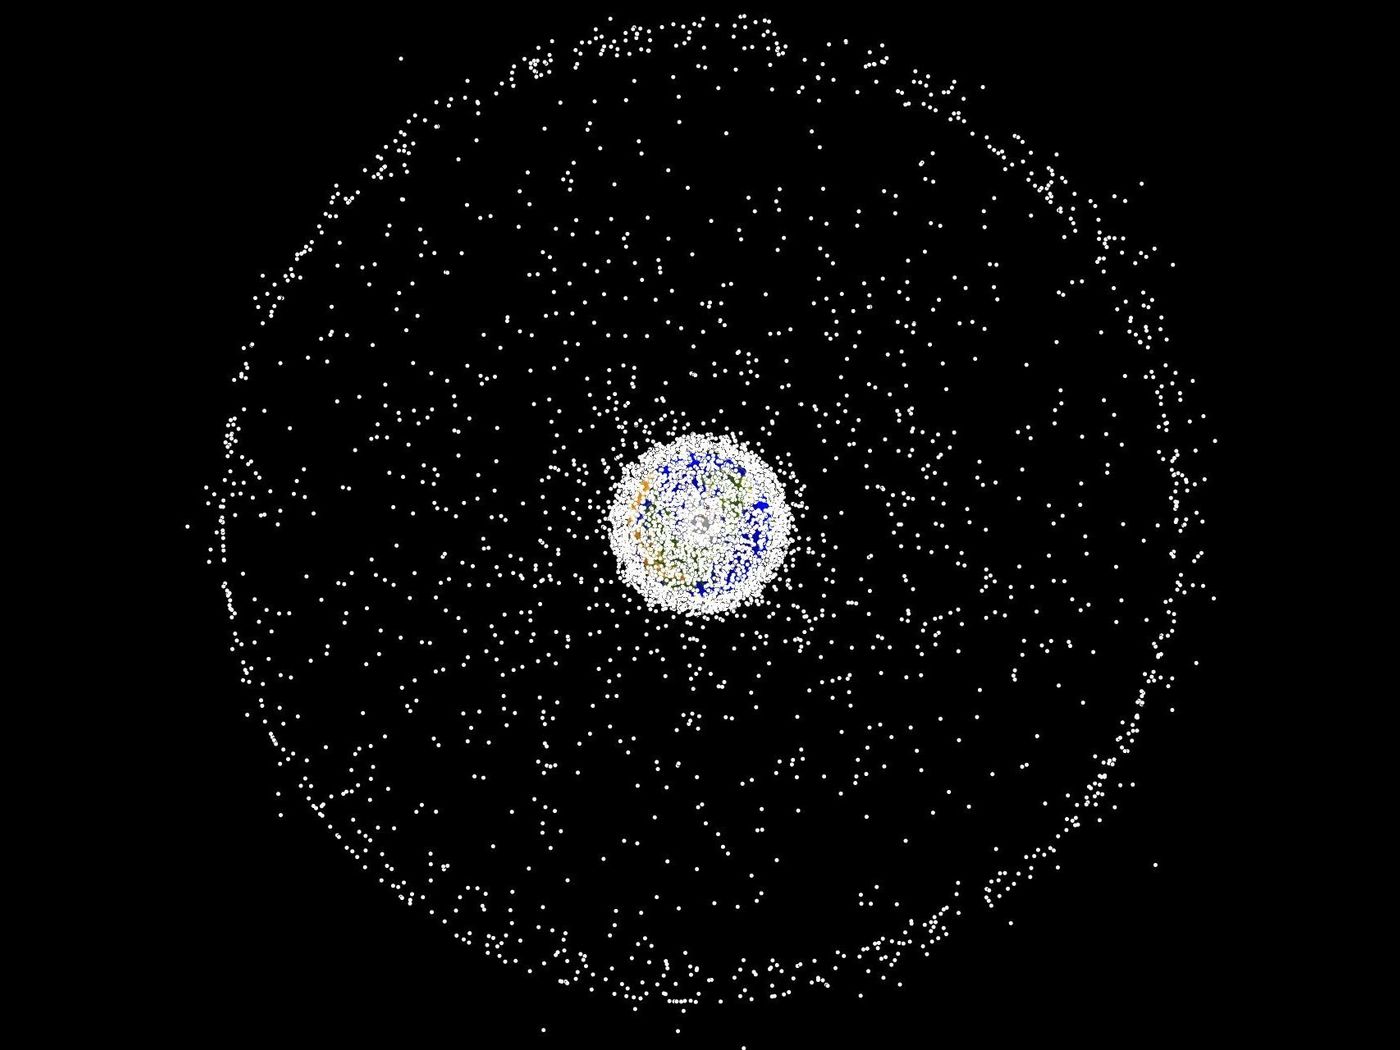 An artist's impression of the collection of space junk surrounding the Earth.